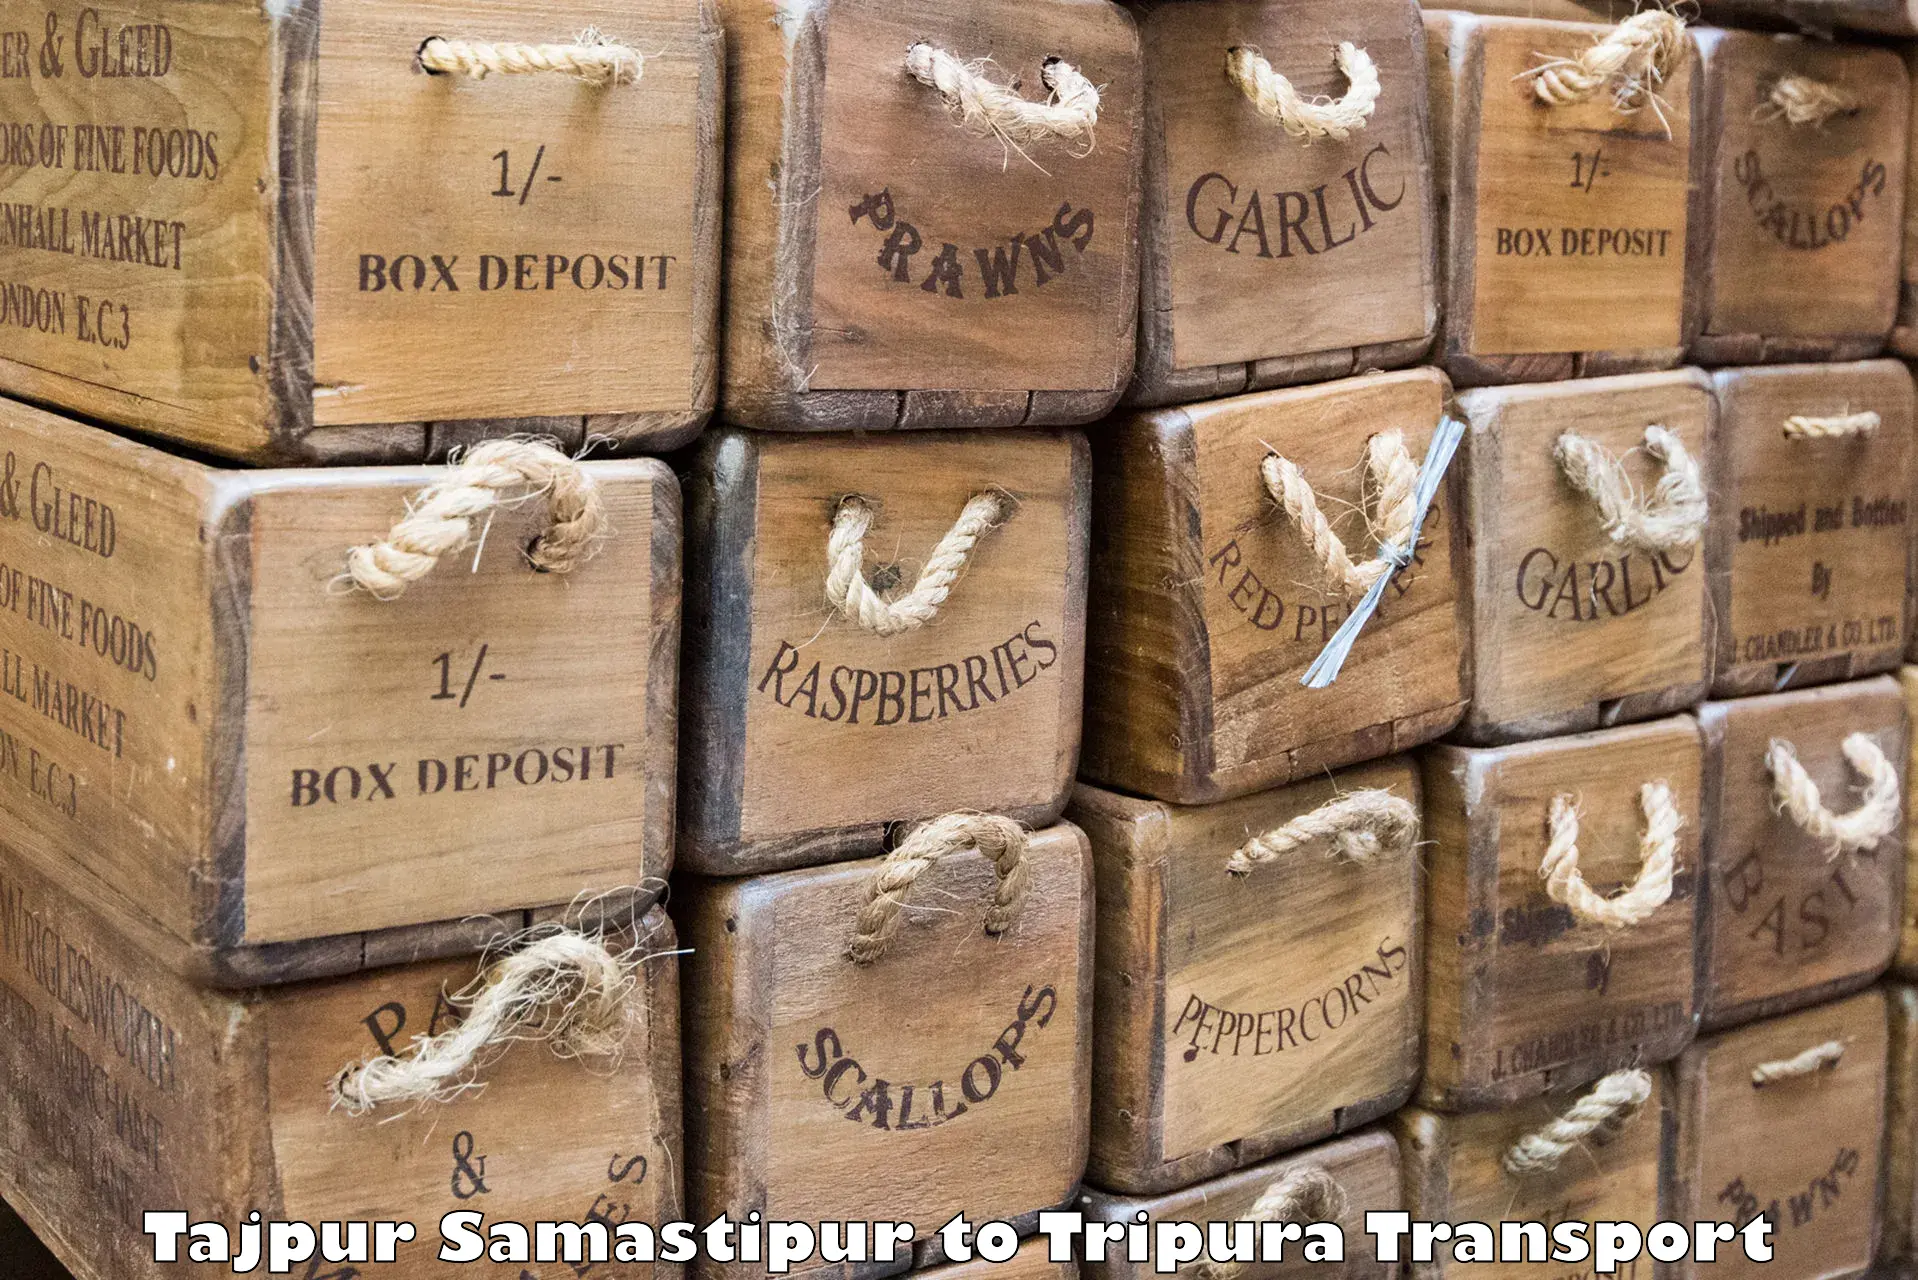 Package delivery services Tajpur Samastipur to Bishalgarh